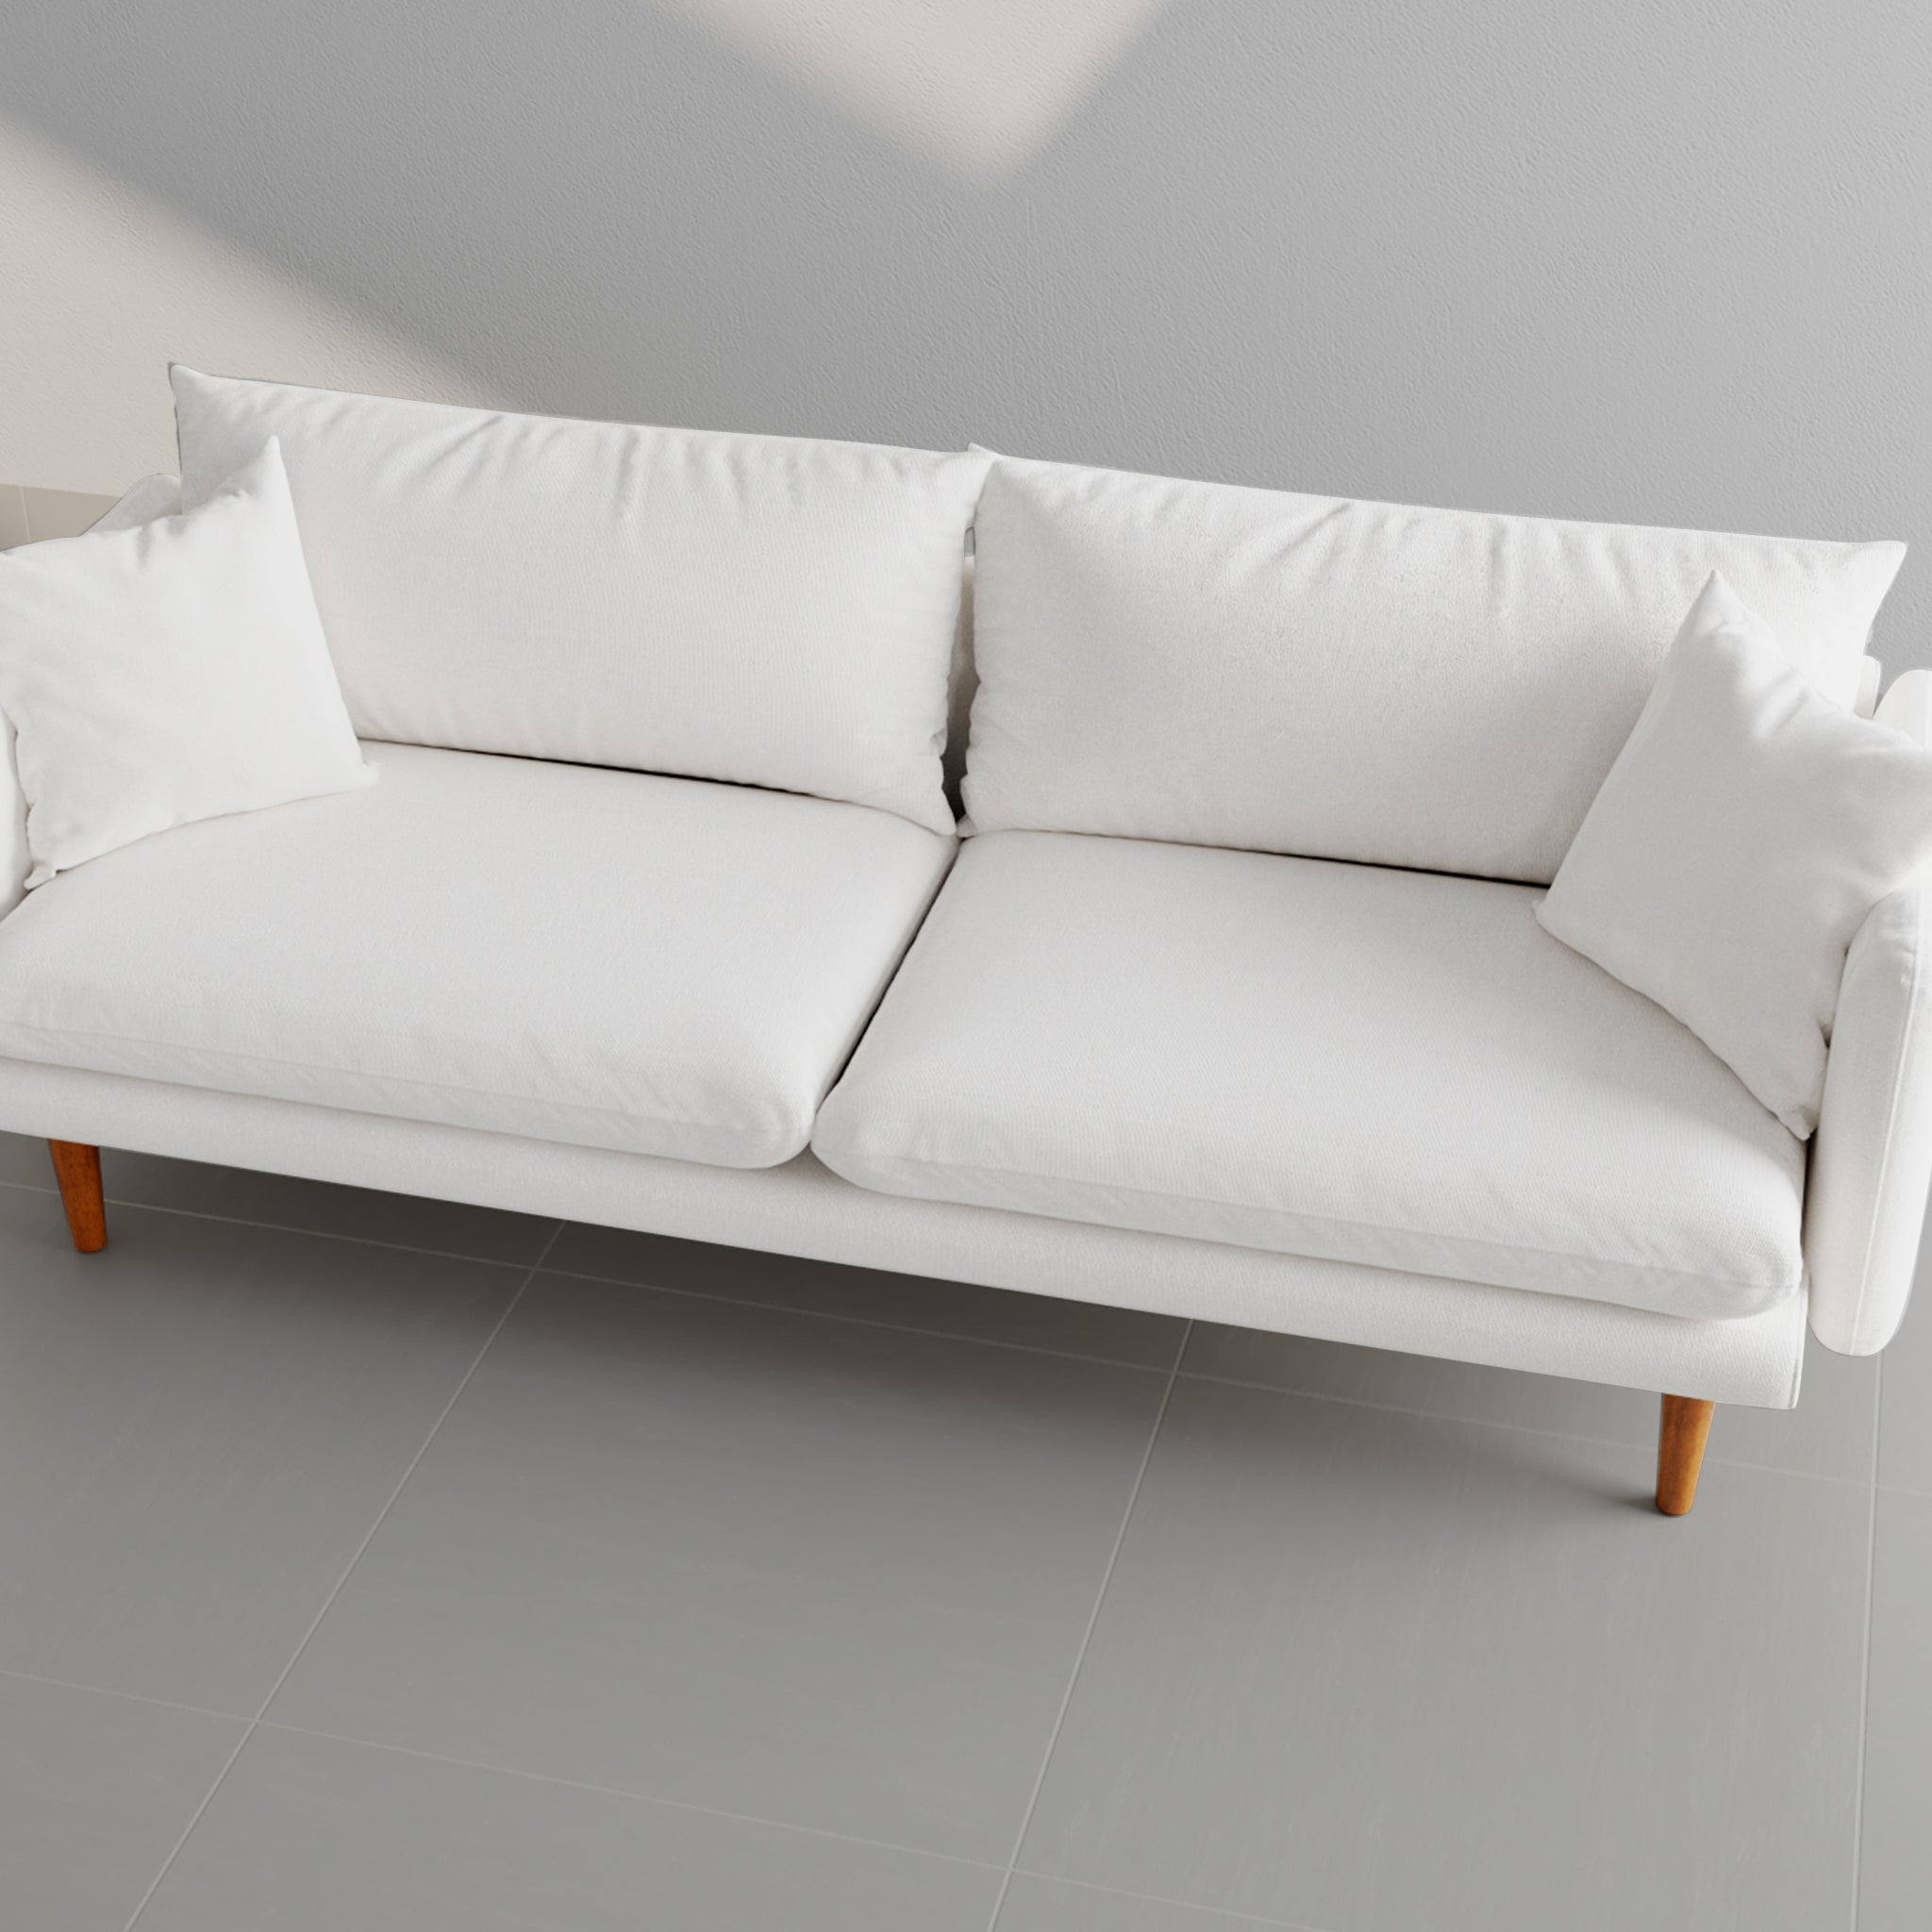 Top view of a sleek white sofa with soft cushions and wooden legs, ideal for modern living room decor.